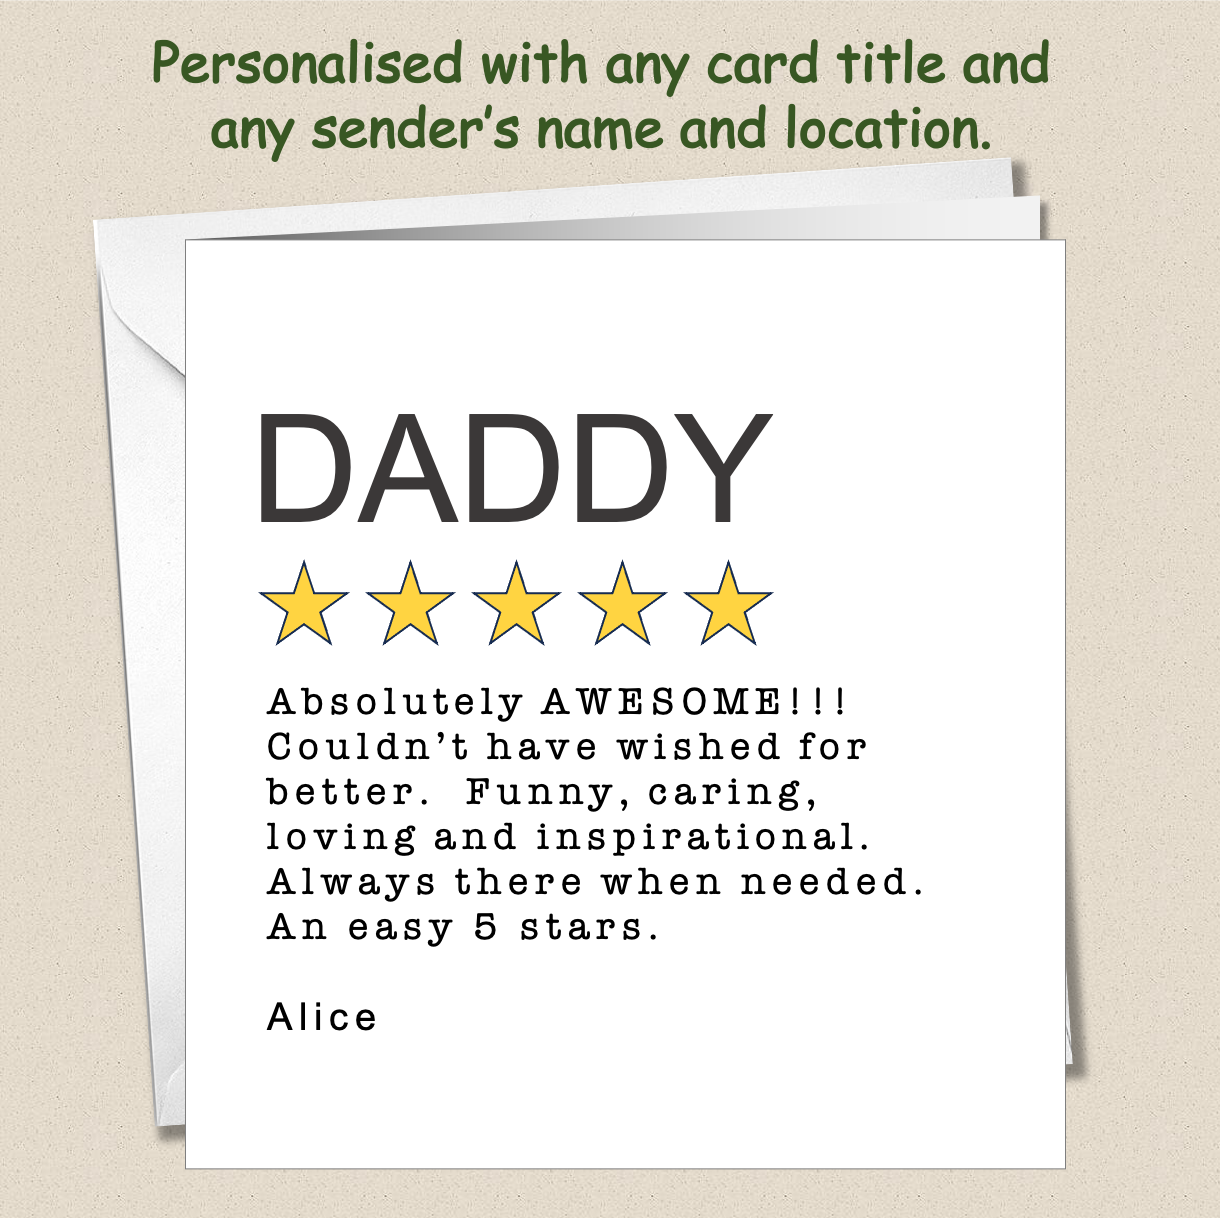 Personalised Father's Day Card - 5 Star Review